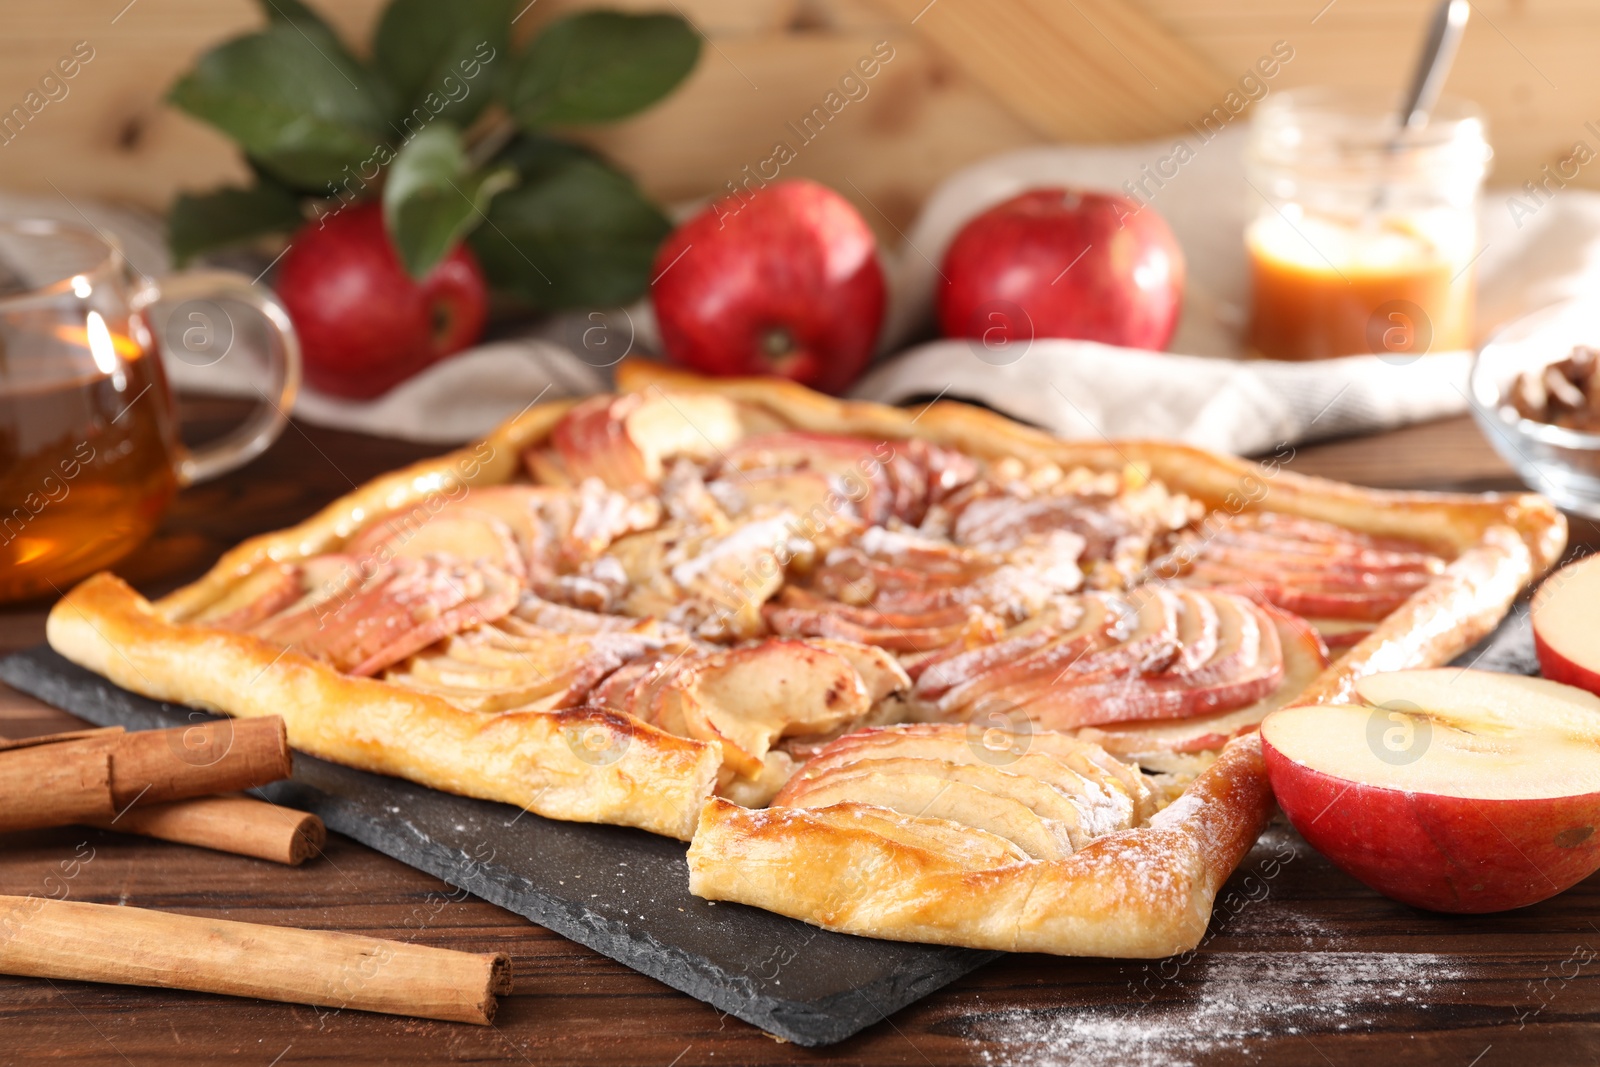 Photo of Tasty apple pie with powdered sugar, cinnamon sticks and fresh fruits on wooden table